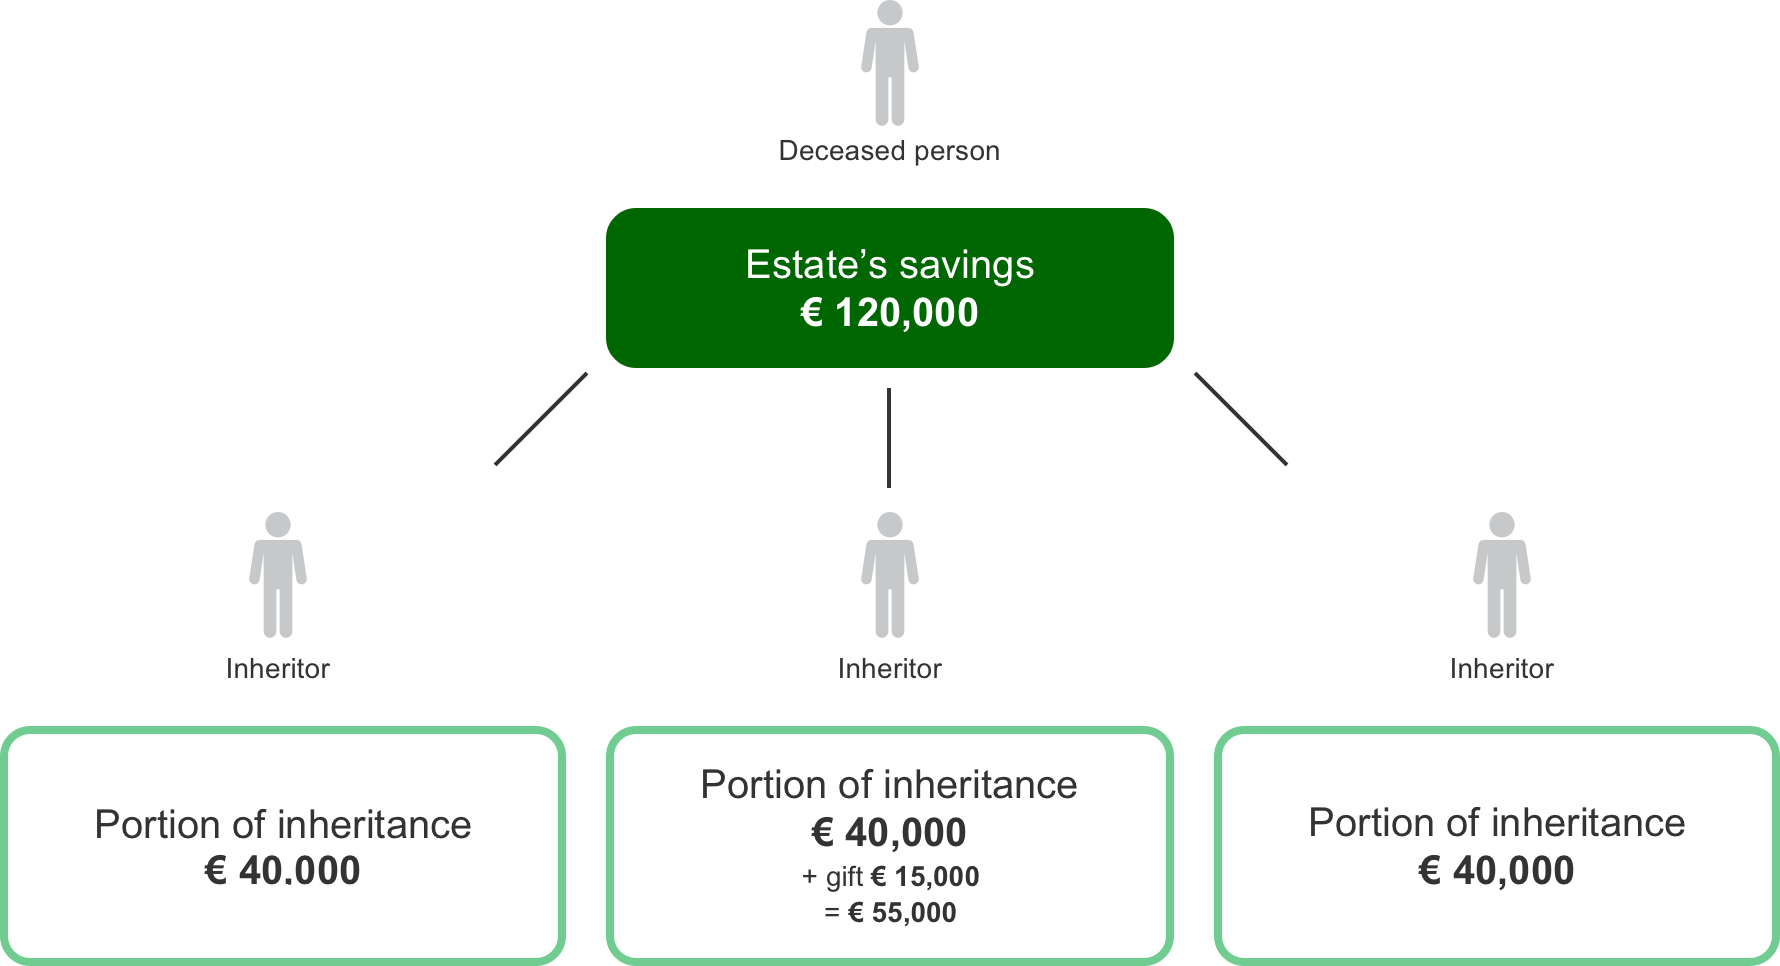 After subtracting liabilities from the estate’s property and assets, net value stands at €120,000. Portions of inheritance, going to 3 heirs, are €40,000 each. In addition, three years or less before the deceased person died, one of the heirs received a gift worth €15,000. This means that the base for this heir’s inheritance tax equals €55,000. 